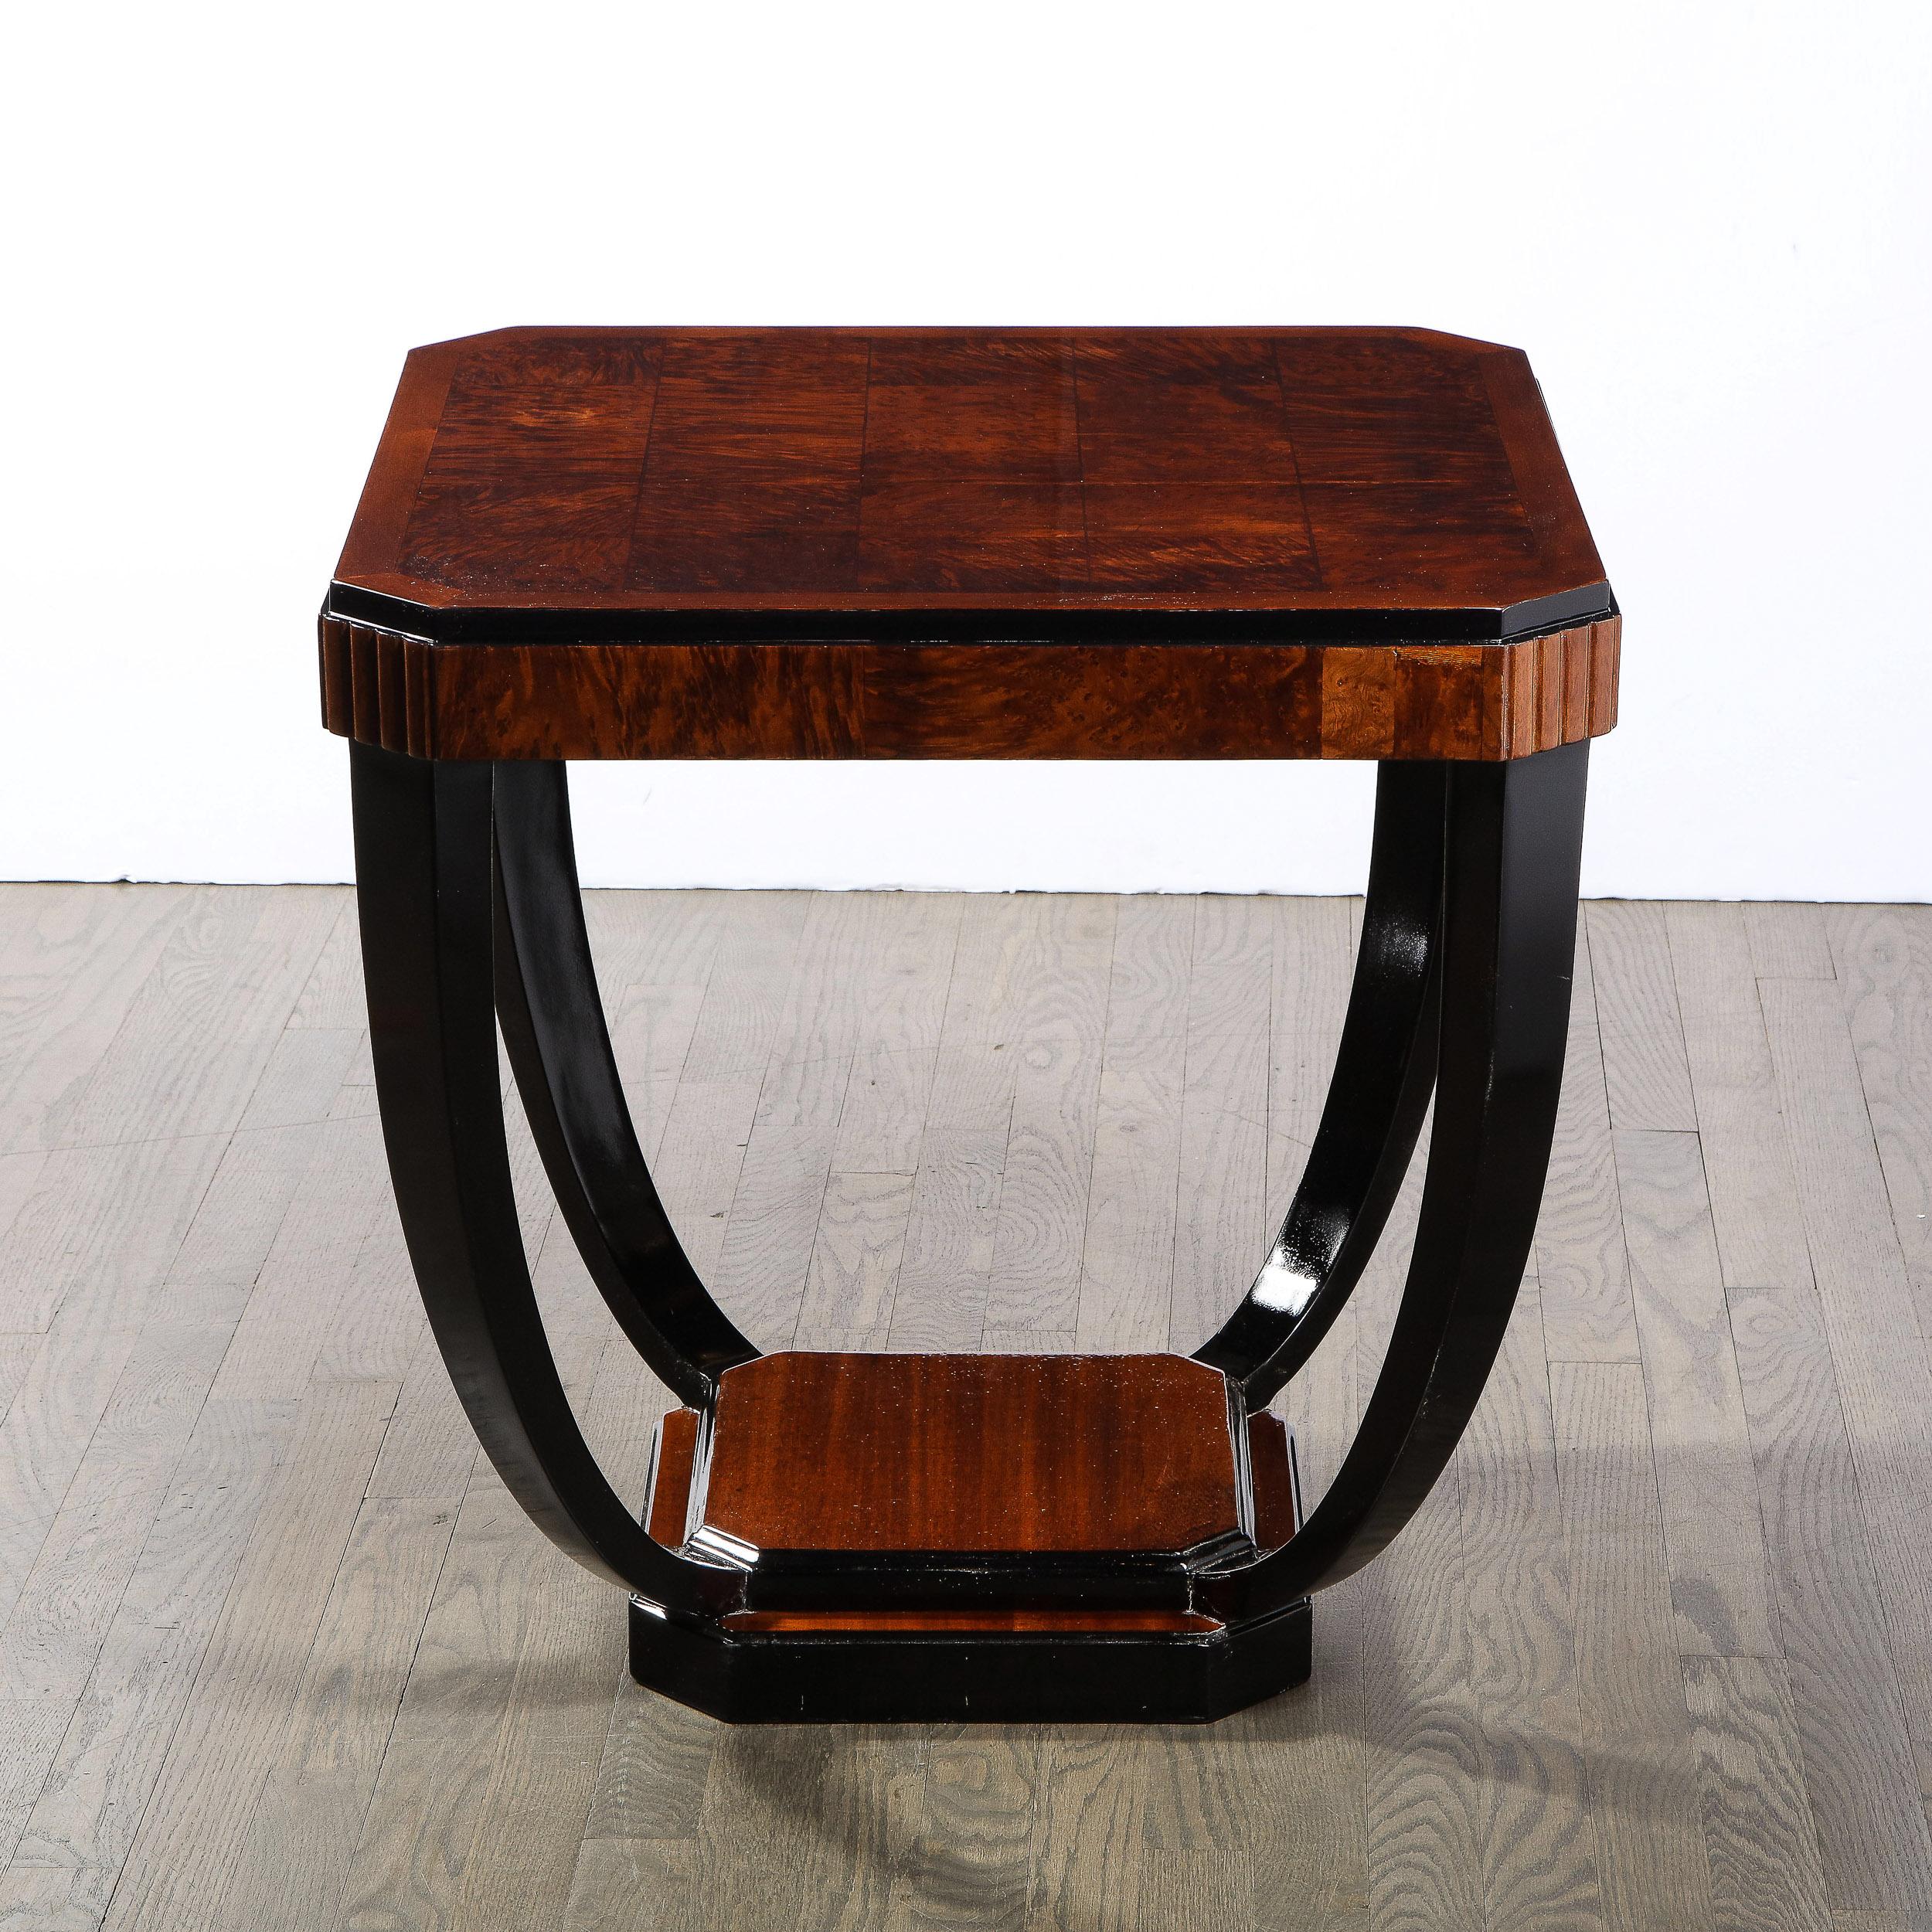 This beautiful Art Deco Machine Age cocktail table was realized in France circa 1935. It feature a skyscraper style base with an octagonal bookmatched walnut bottom wrapped in back lacquer with a smaller concentric form in the same shape and